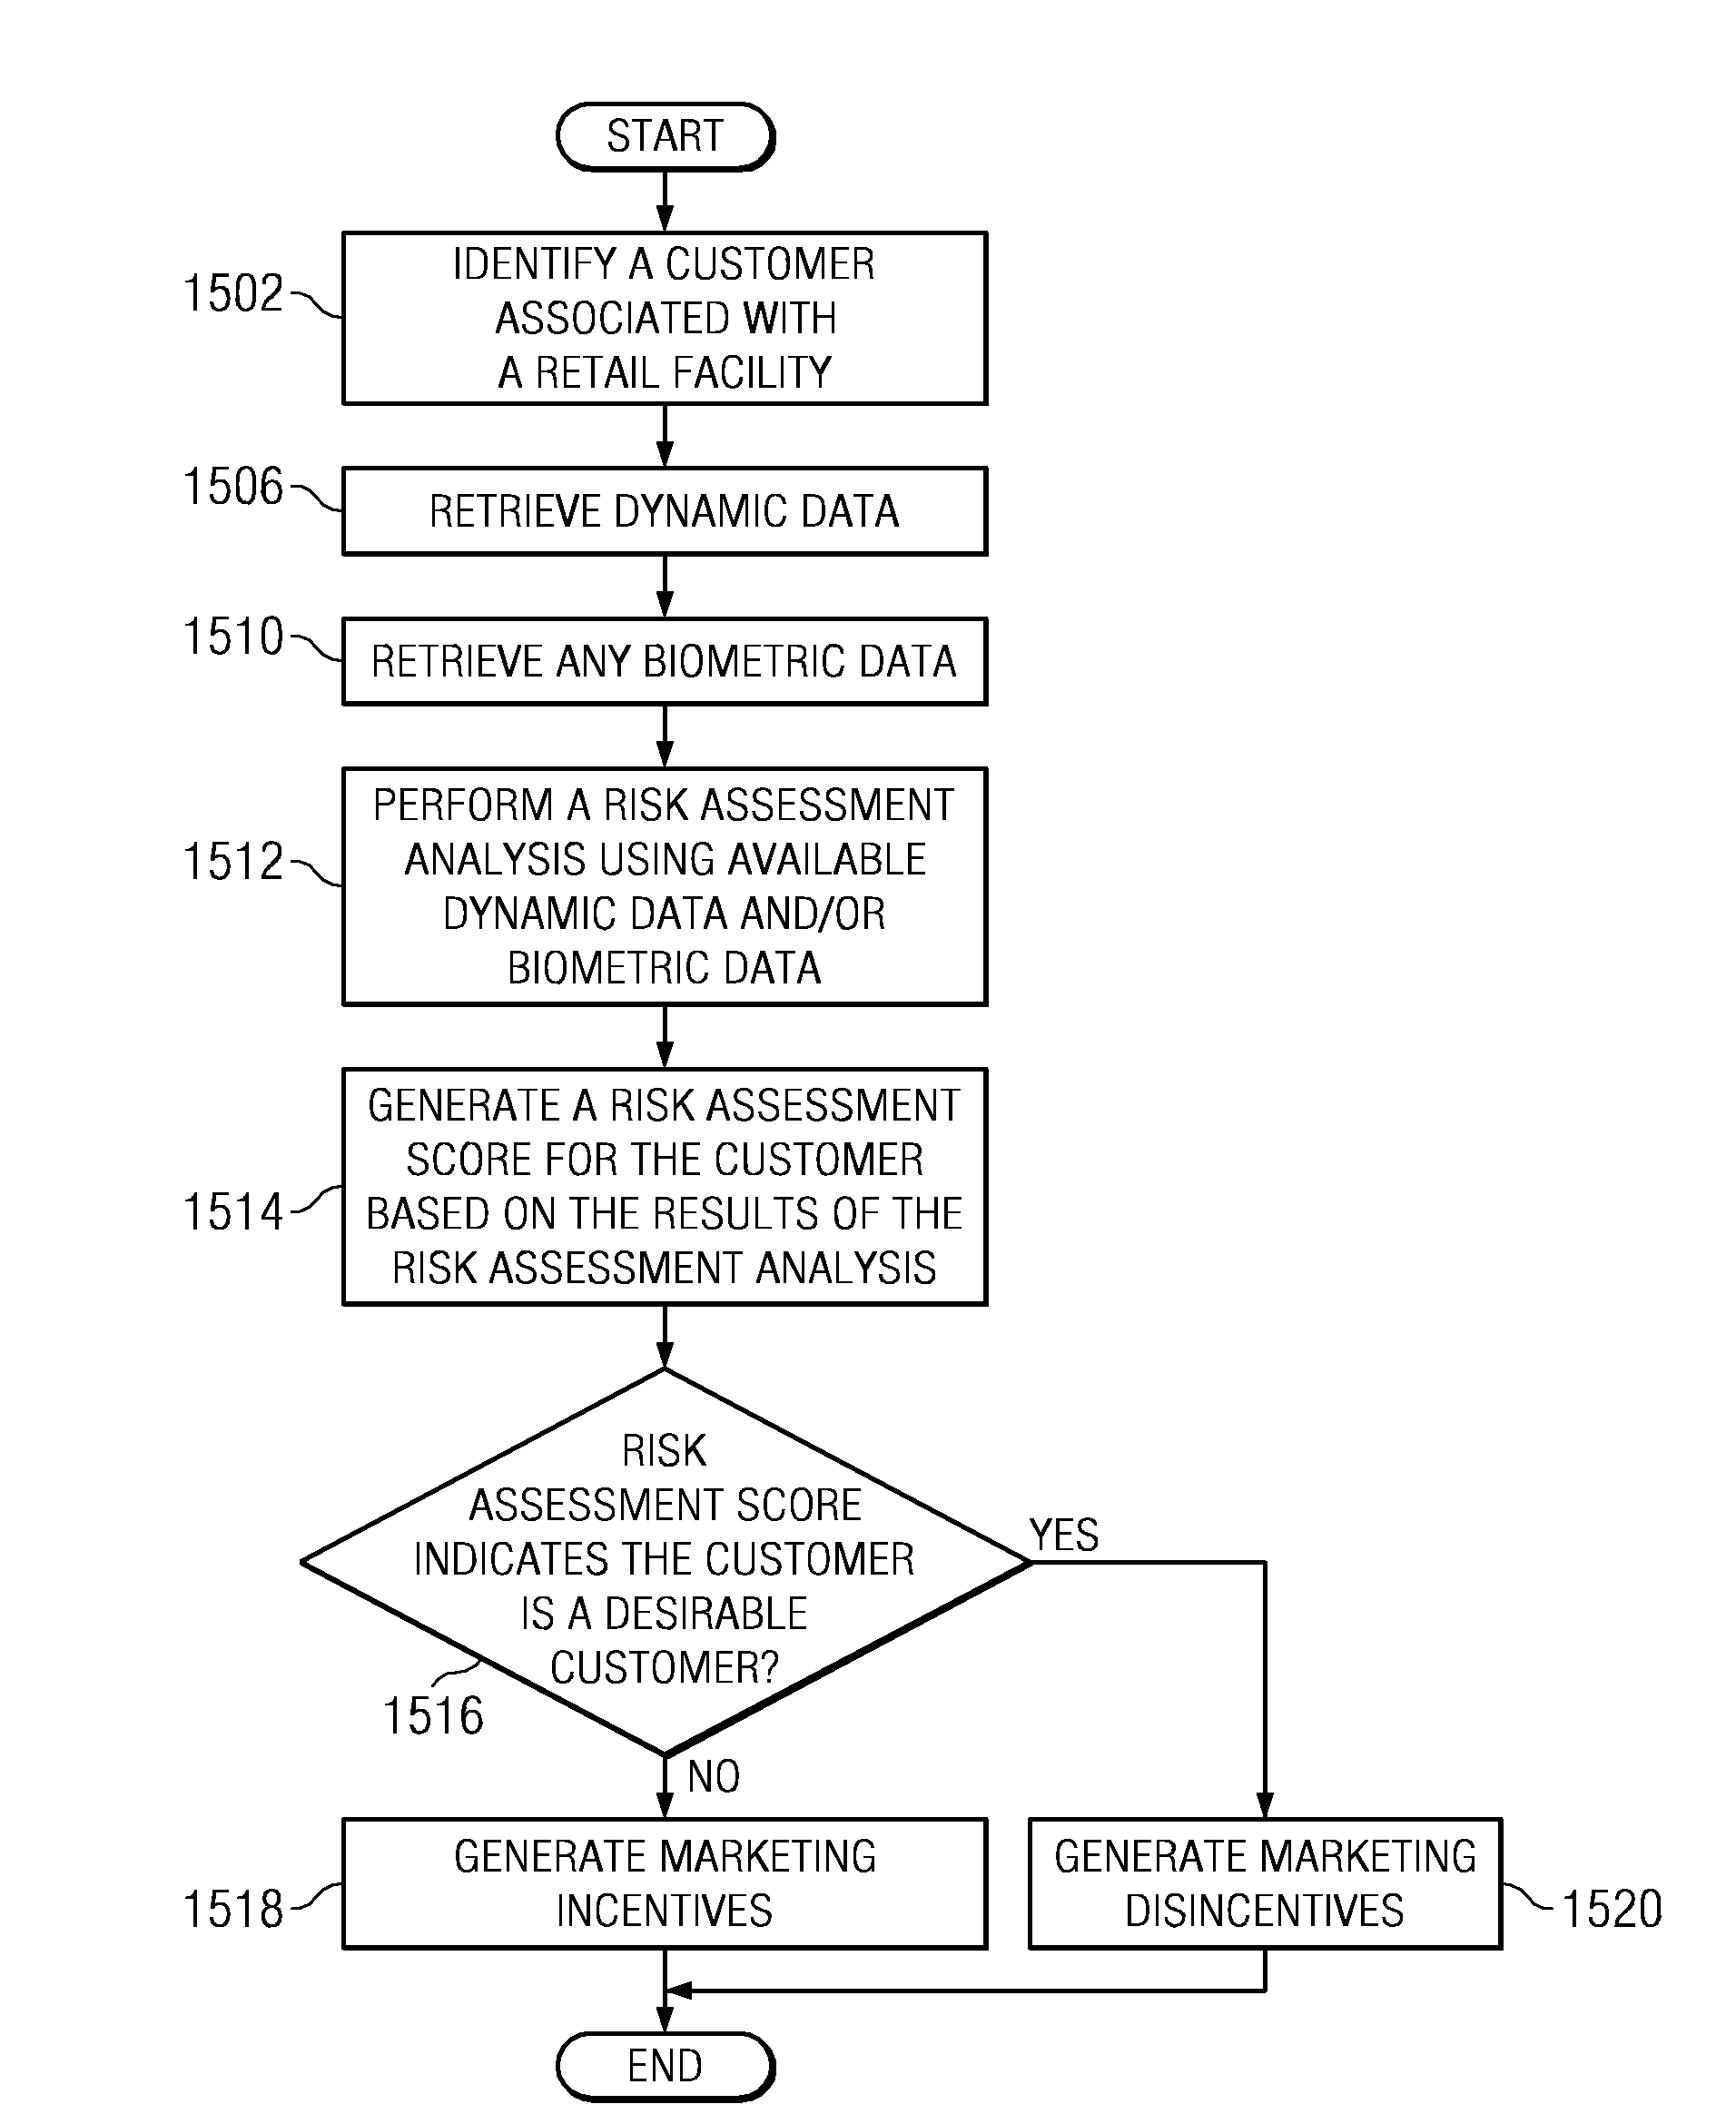 Method and apparatus for presenting disincentive marketing content to a customer based on a customer risk assessment